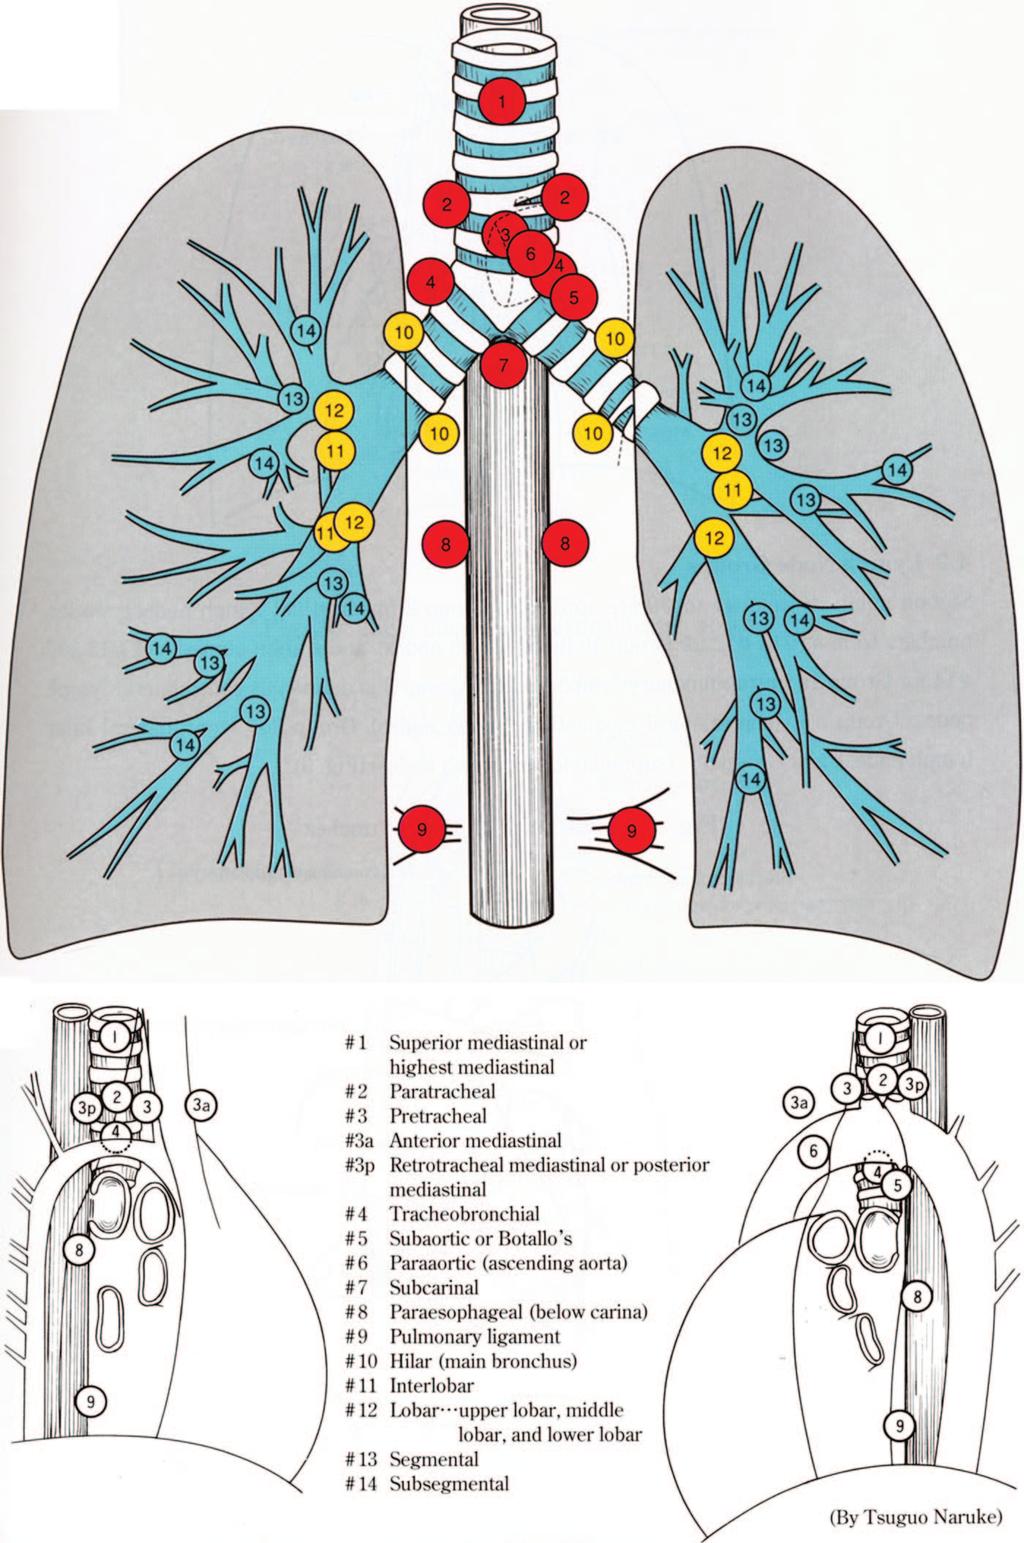 Journal of Thoracic Oncology Volume 4, Number 5, May 2009 FIGURE 1. The Naruke lymph node map for the staging of lung cancers as recommended by the Japan Lung Cancer Society.